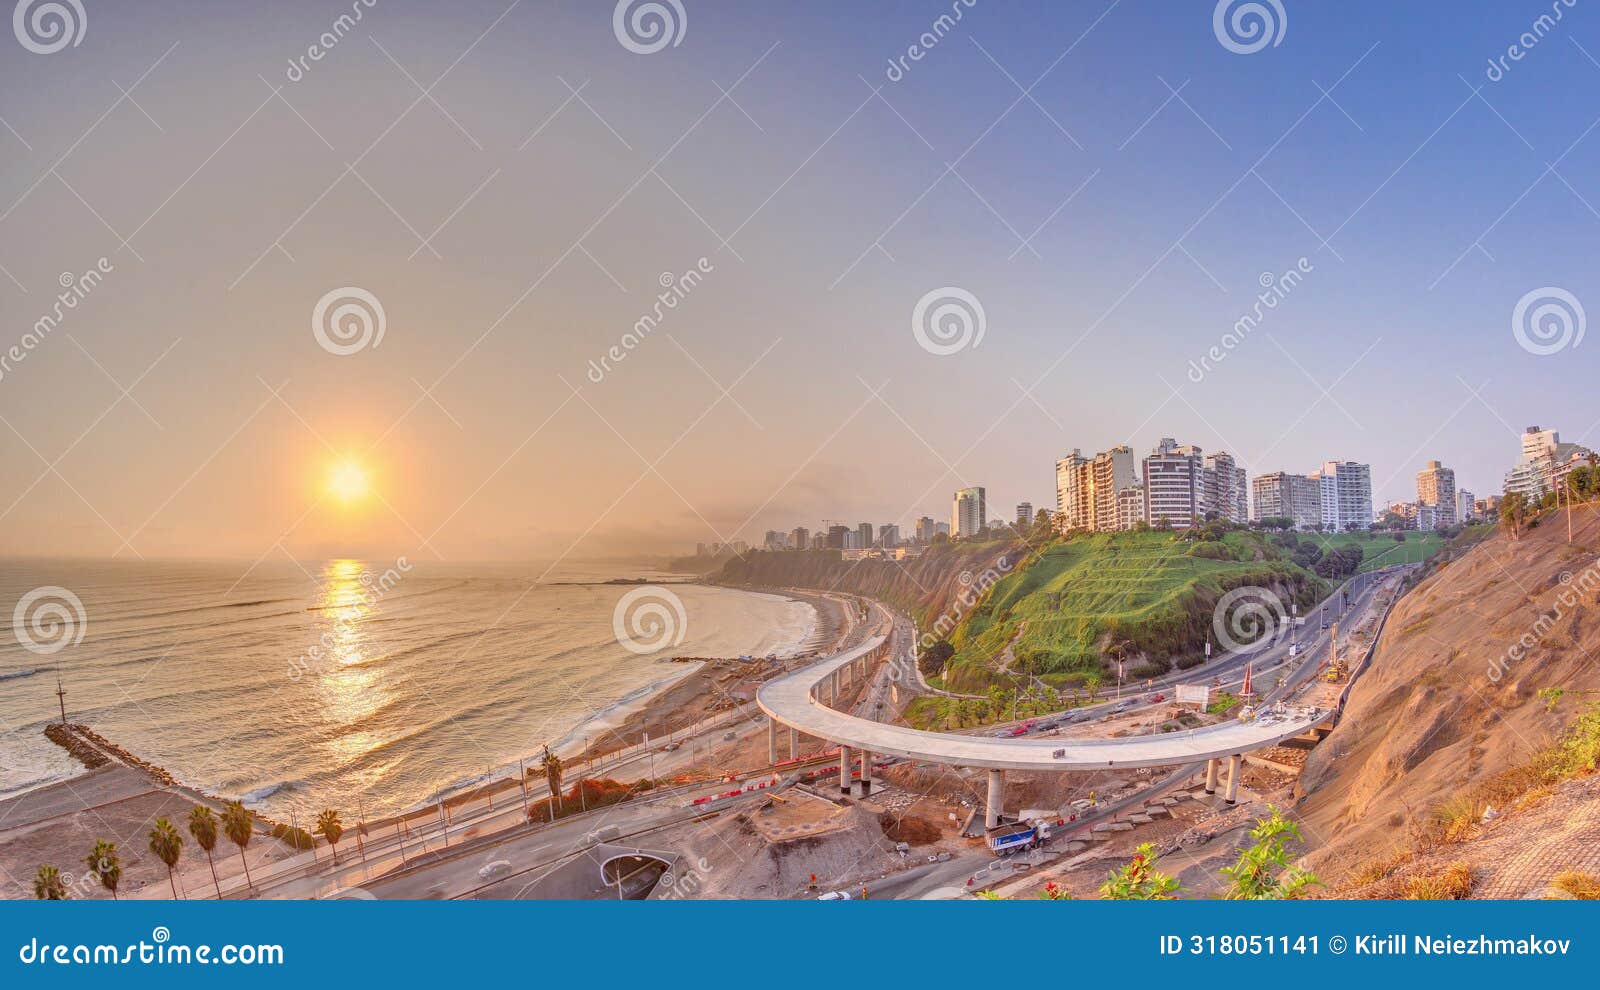 aerial sunset view of lima's coastline in the neighborhood of miraflores timelapse, lima, peru